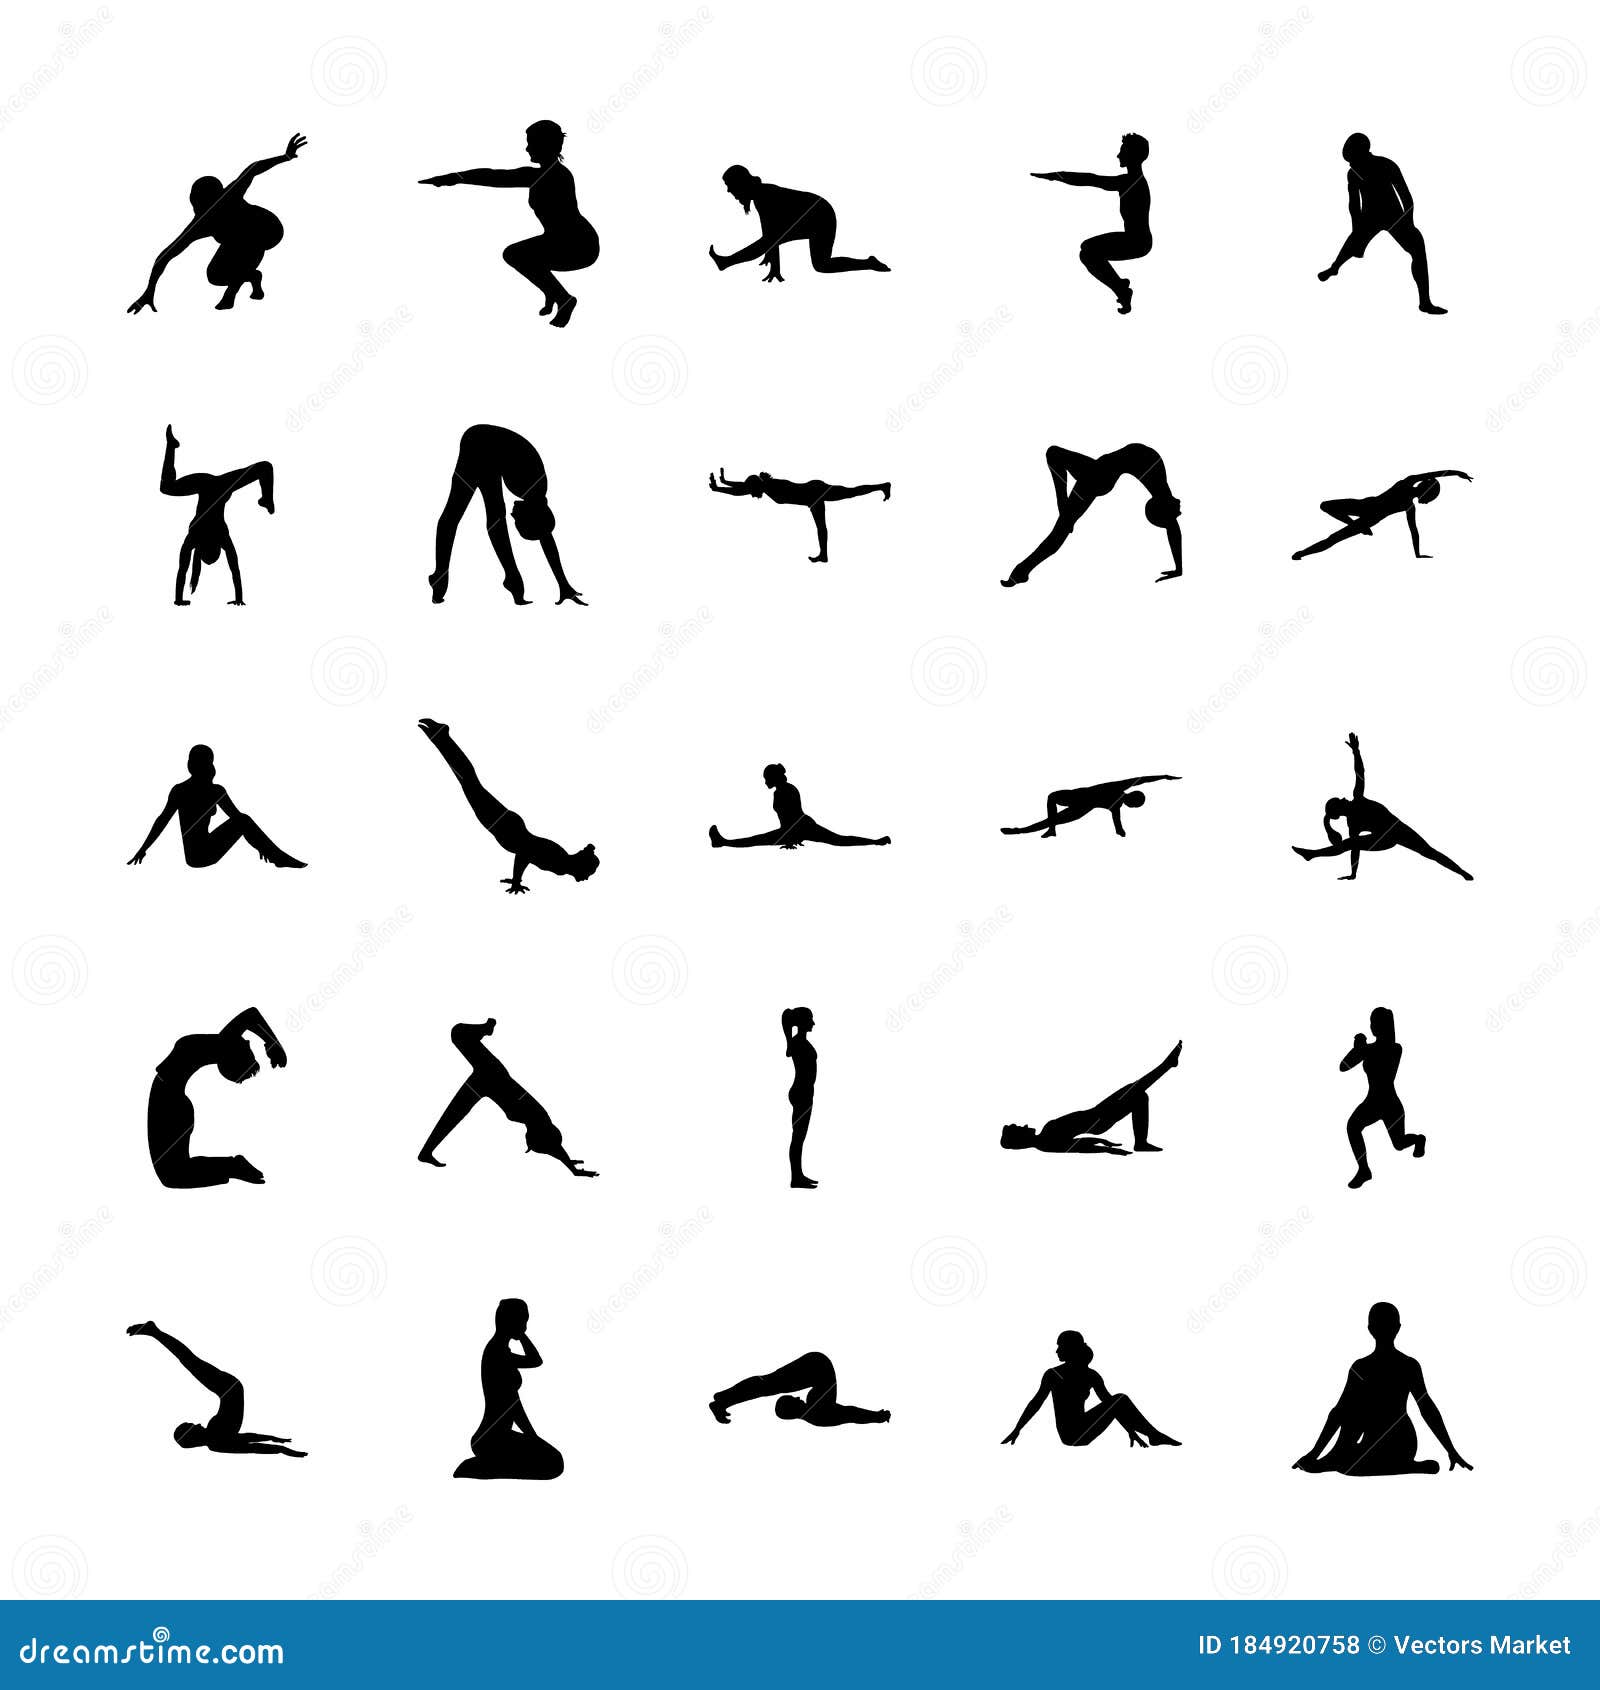 Yoga Solid Pictograms Pack stock vector. Illustration of pack - 184920758